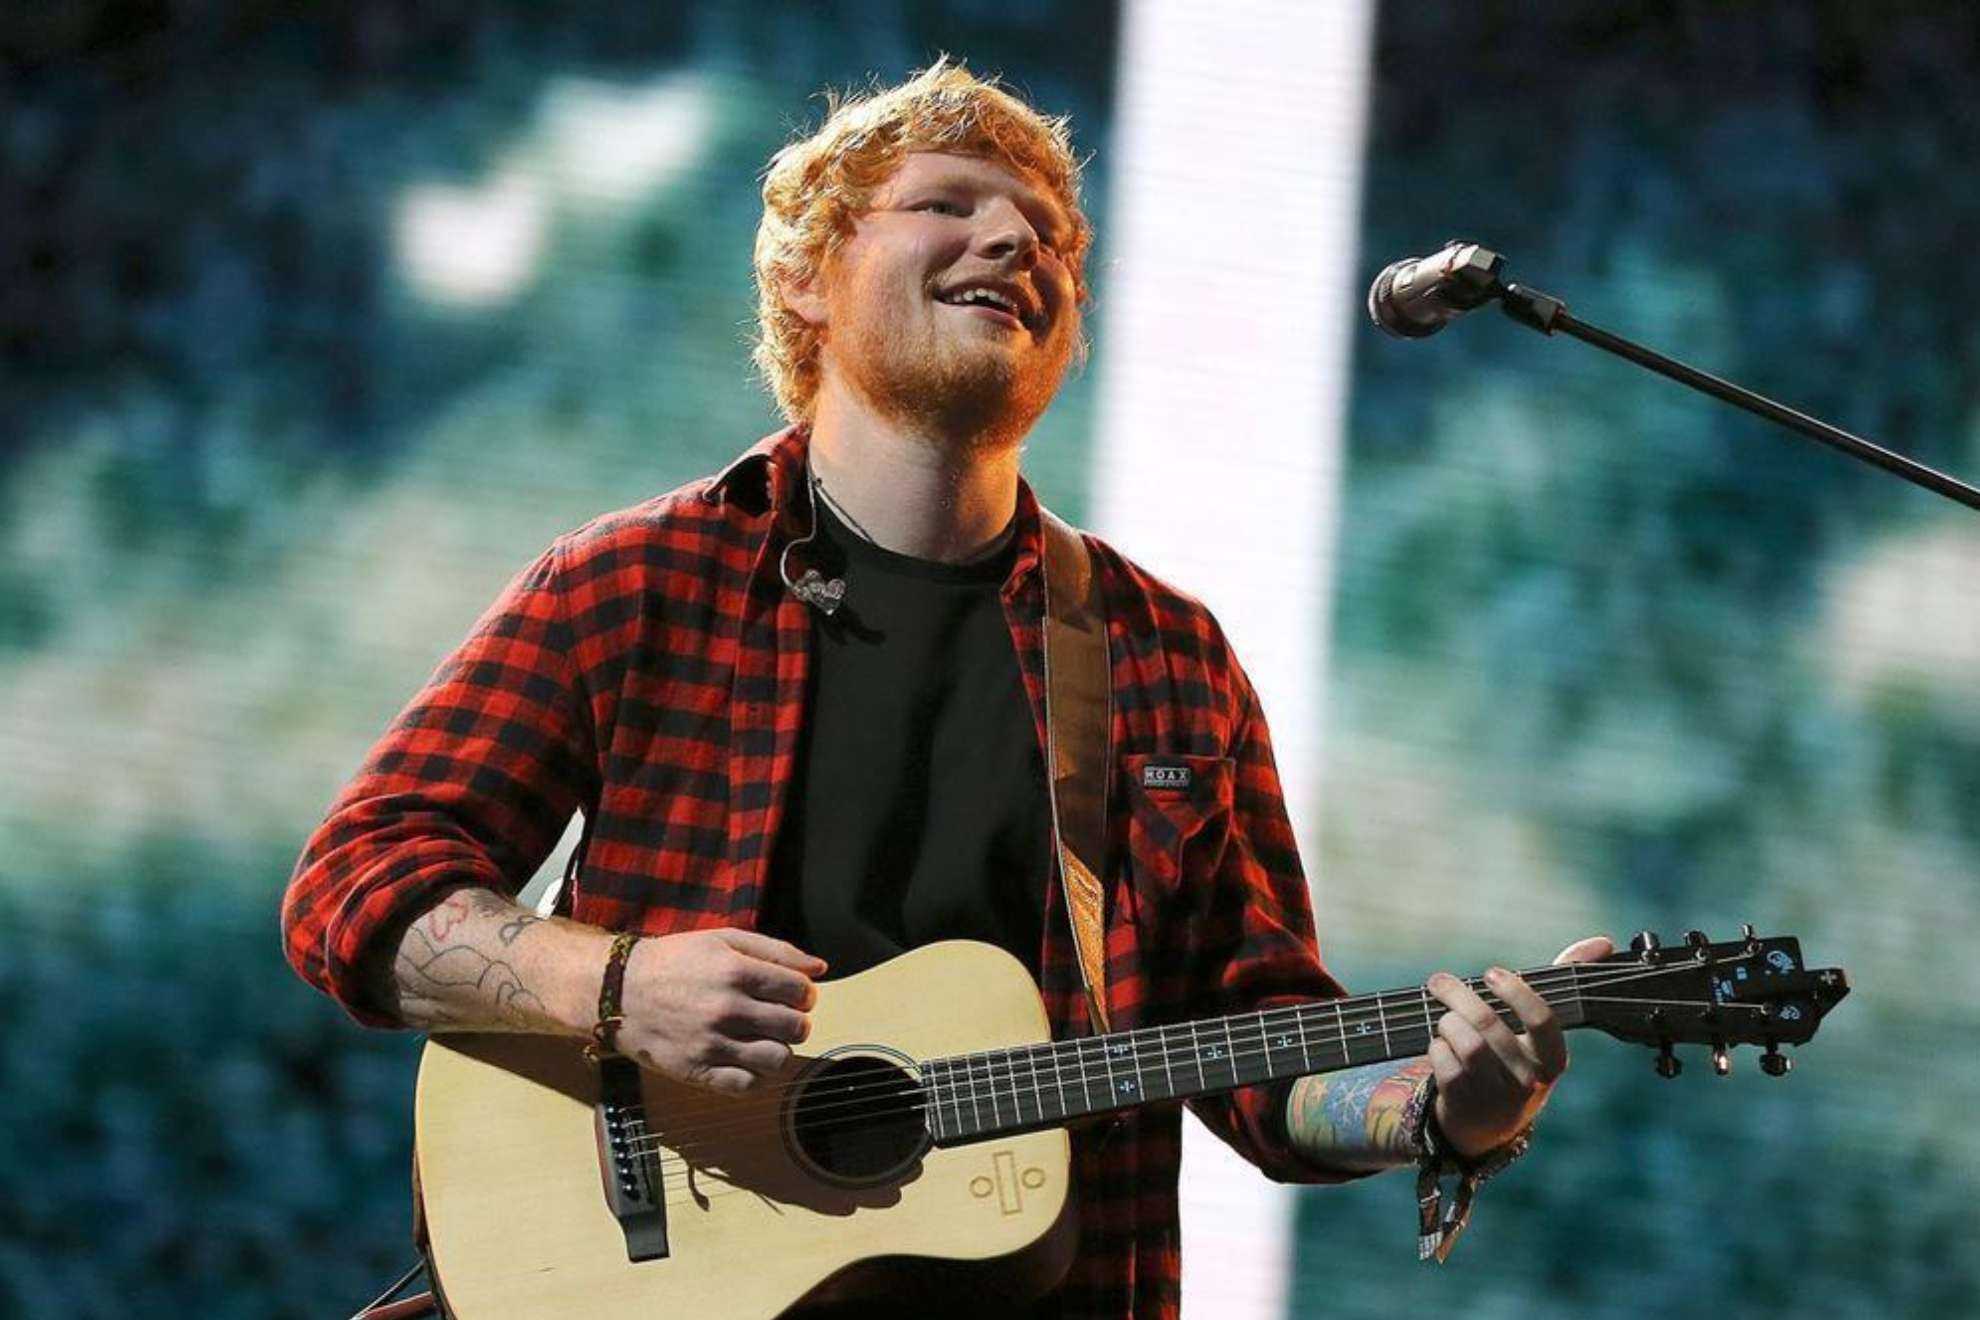 Top 10 underrated tracks by Ed Sheeran you need to add to your playlist